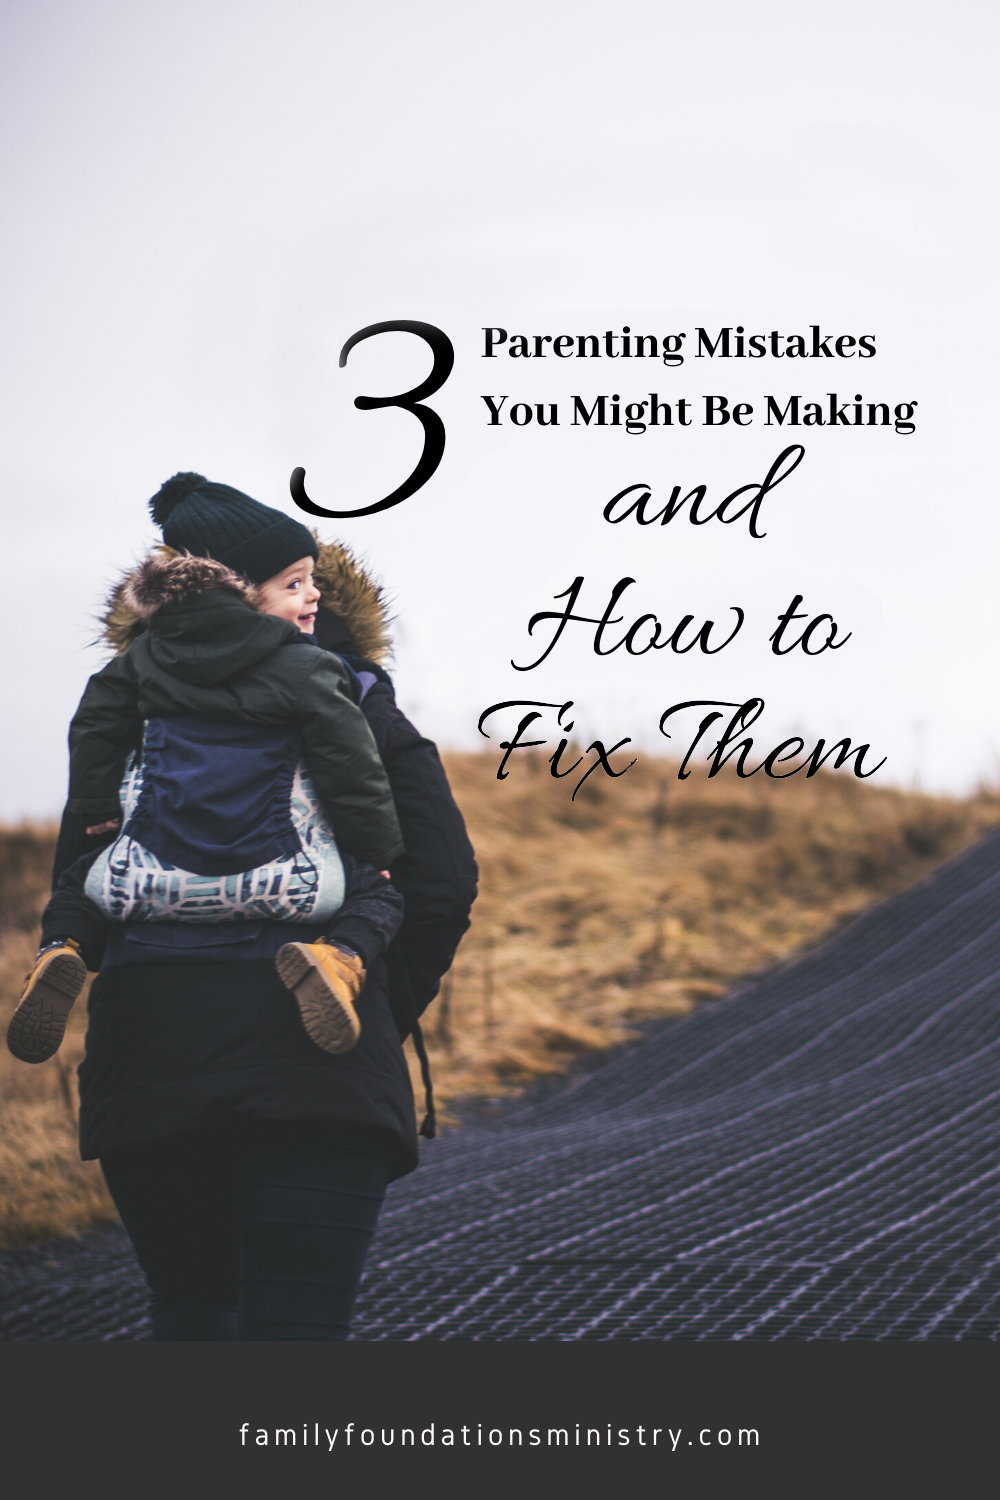 3 Parenting Mistakes you might be making and how to fix them